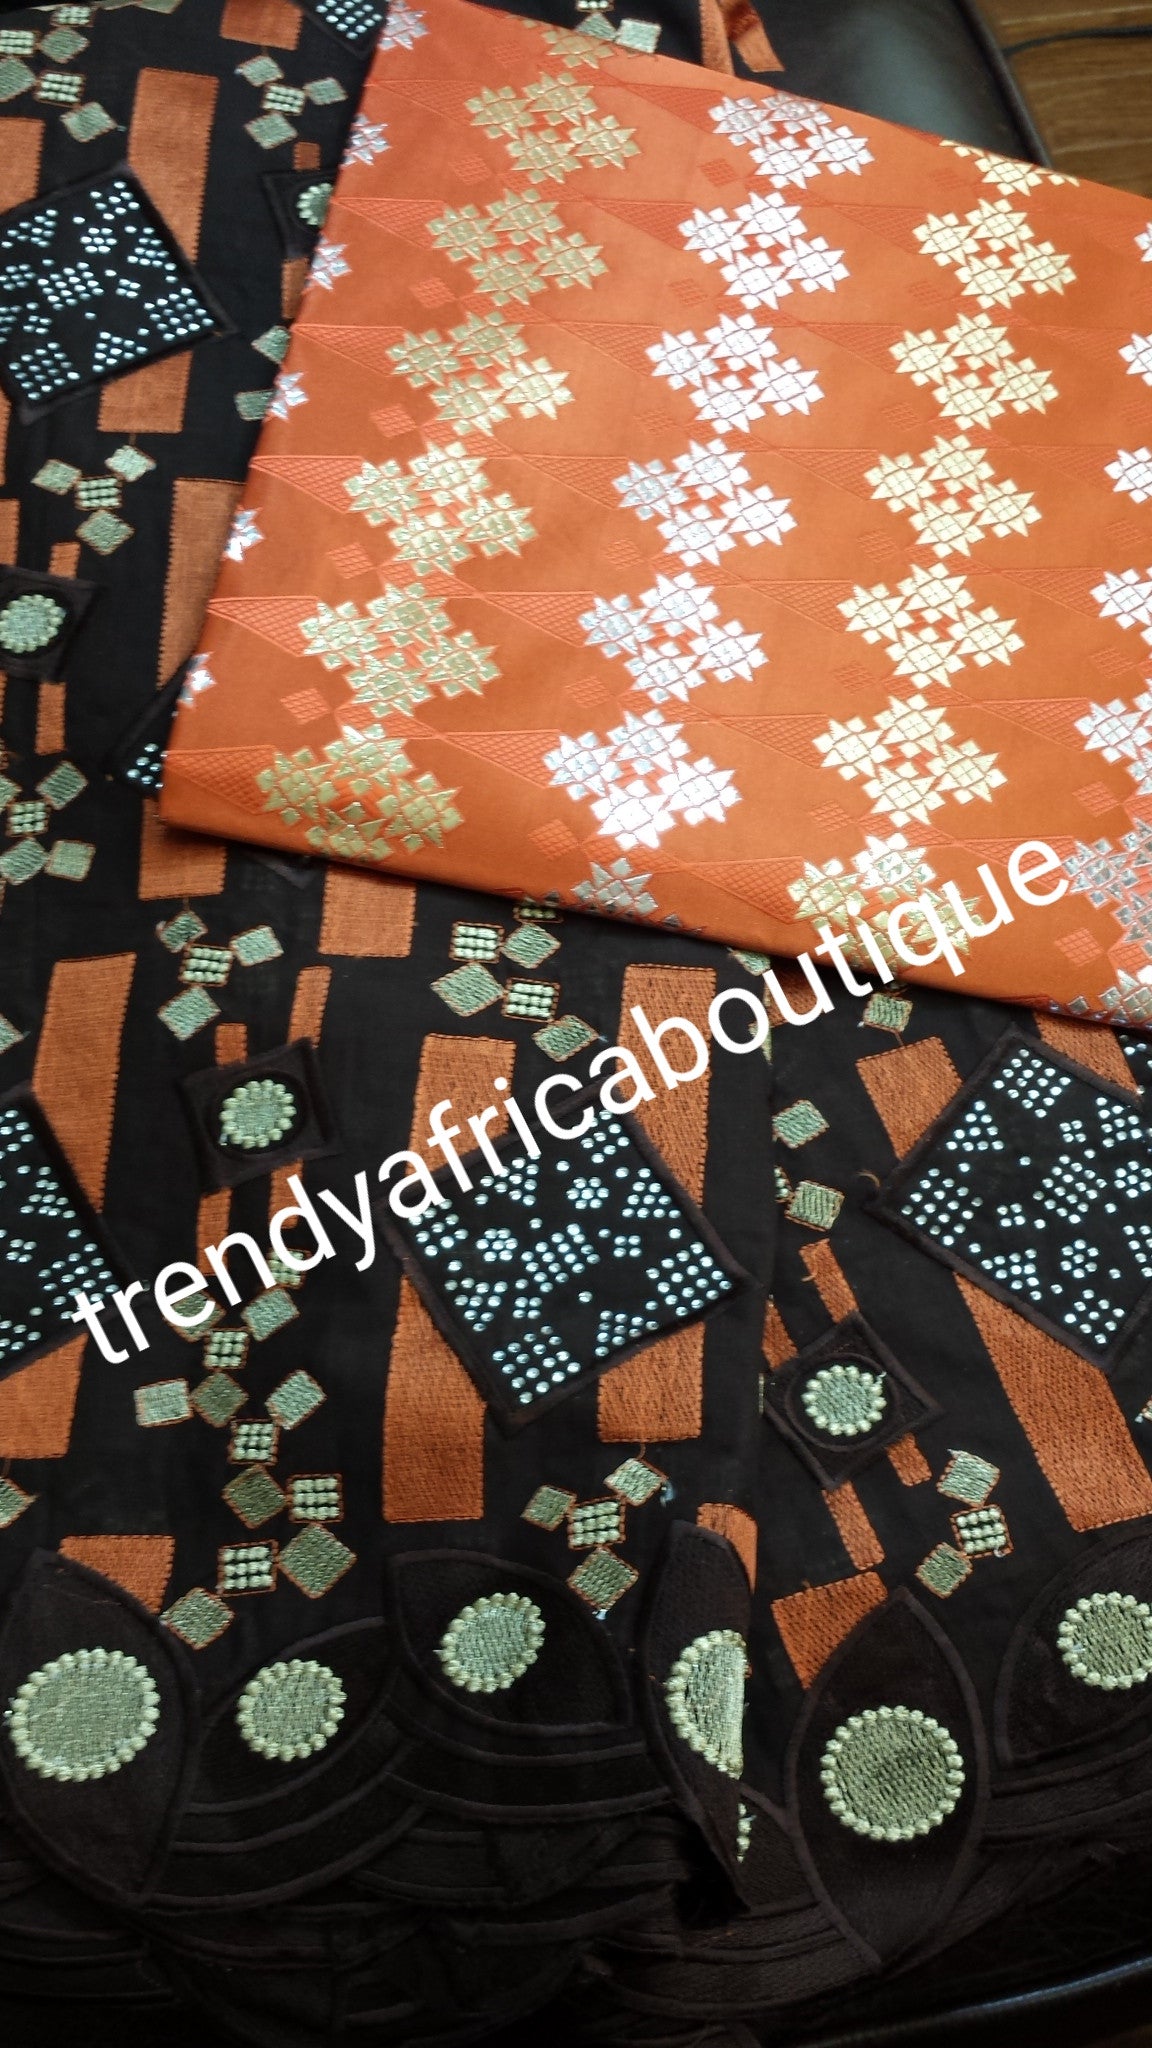 Bonus Sale: Original Quality Big Swiss lace fabric for Nigerian\African Celebrants. Chocolate brown/Orange with all over crystal stones. Coffee brown lace. Sold with orange gele (headtie)